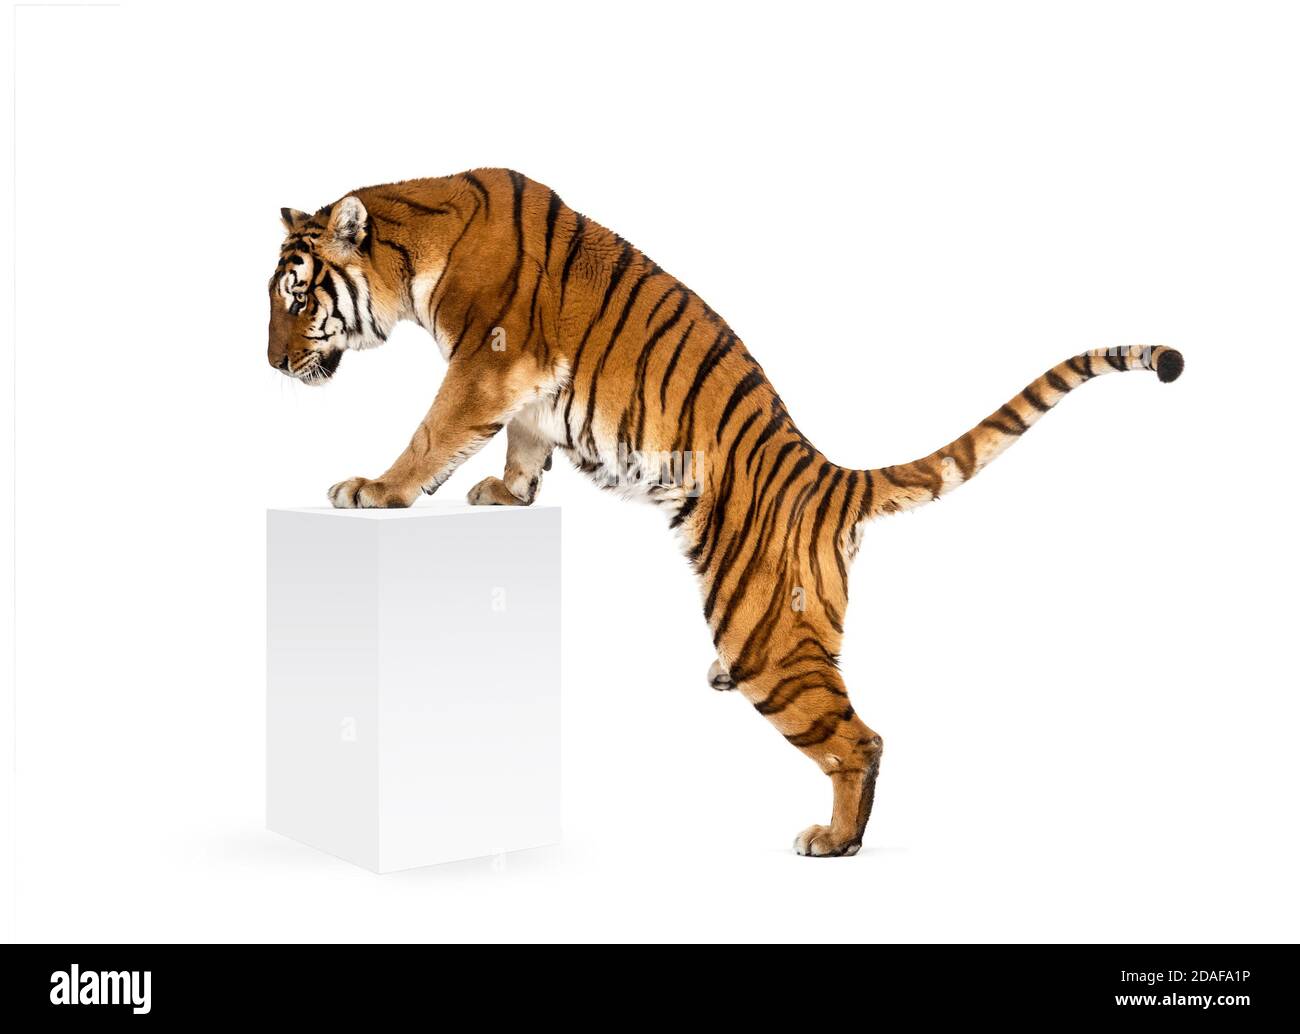 Tiger getting up a white box, isolated on white Stock Photo